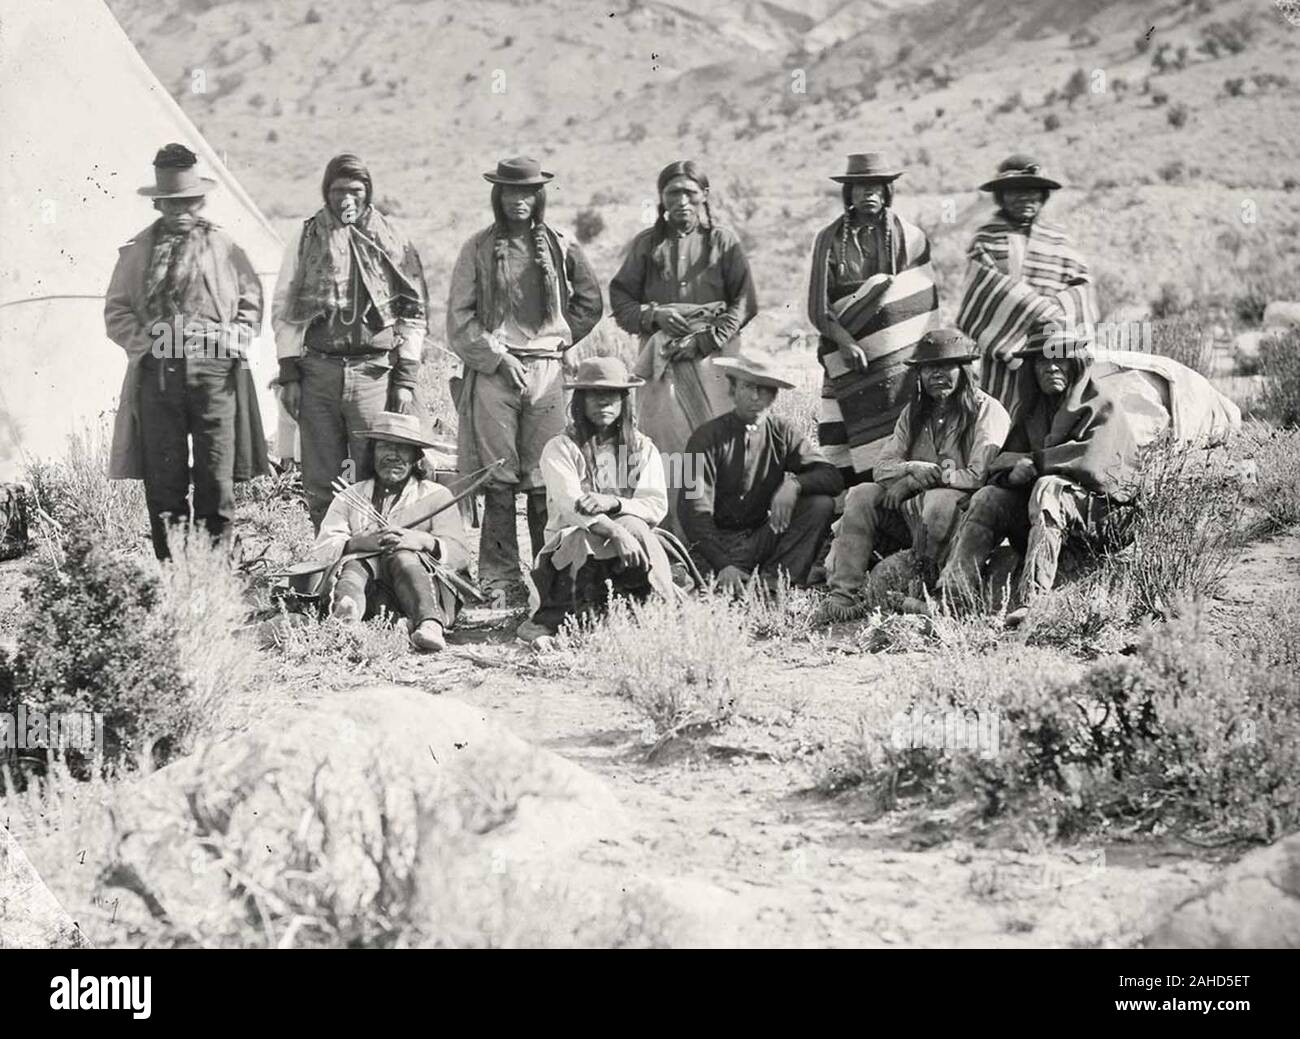 American West in vintage photo, 1860s-1870s Stock Photo